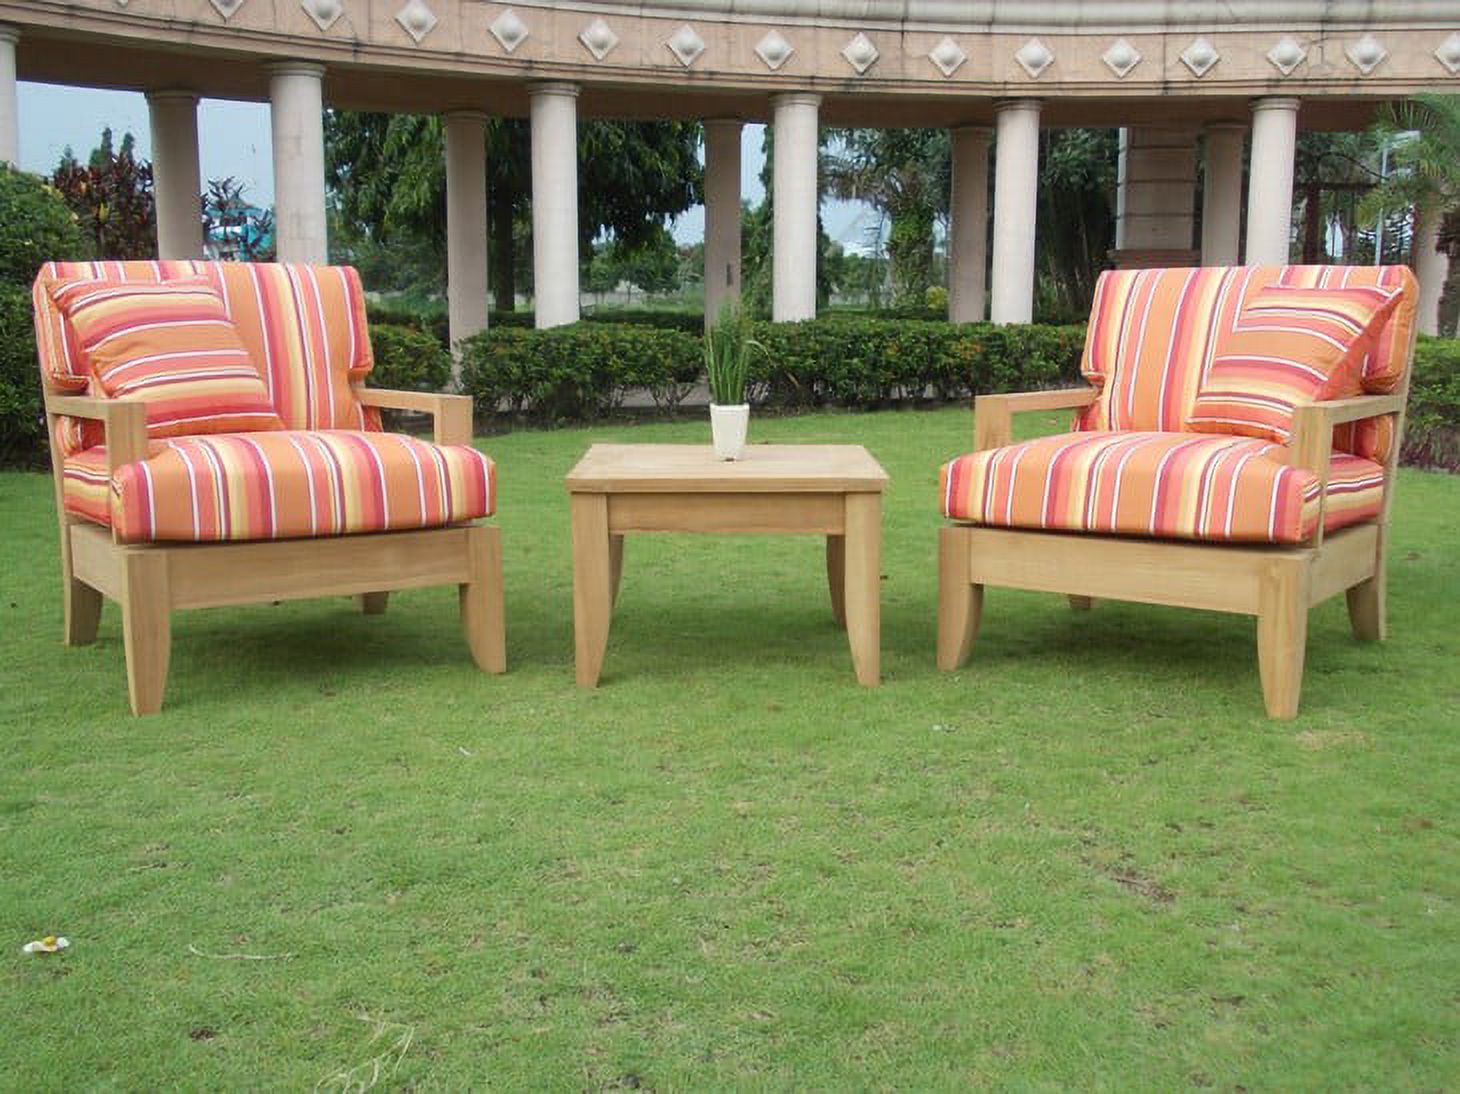 WholesaleTeak Outdoor Patio Grade-A Teak Wood Atnas 3 Piece Teak Sofa Lounge Chair Set -2 Lounge Chairs and 1 Side/ End Table - Furniture only #WMSSAT2 - image 1 of 4